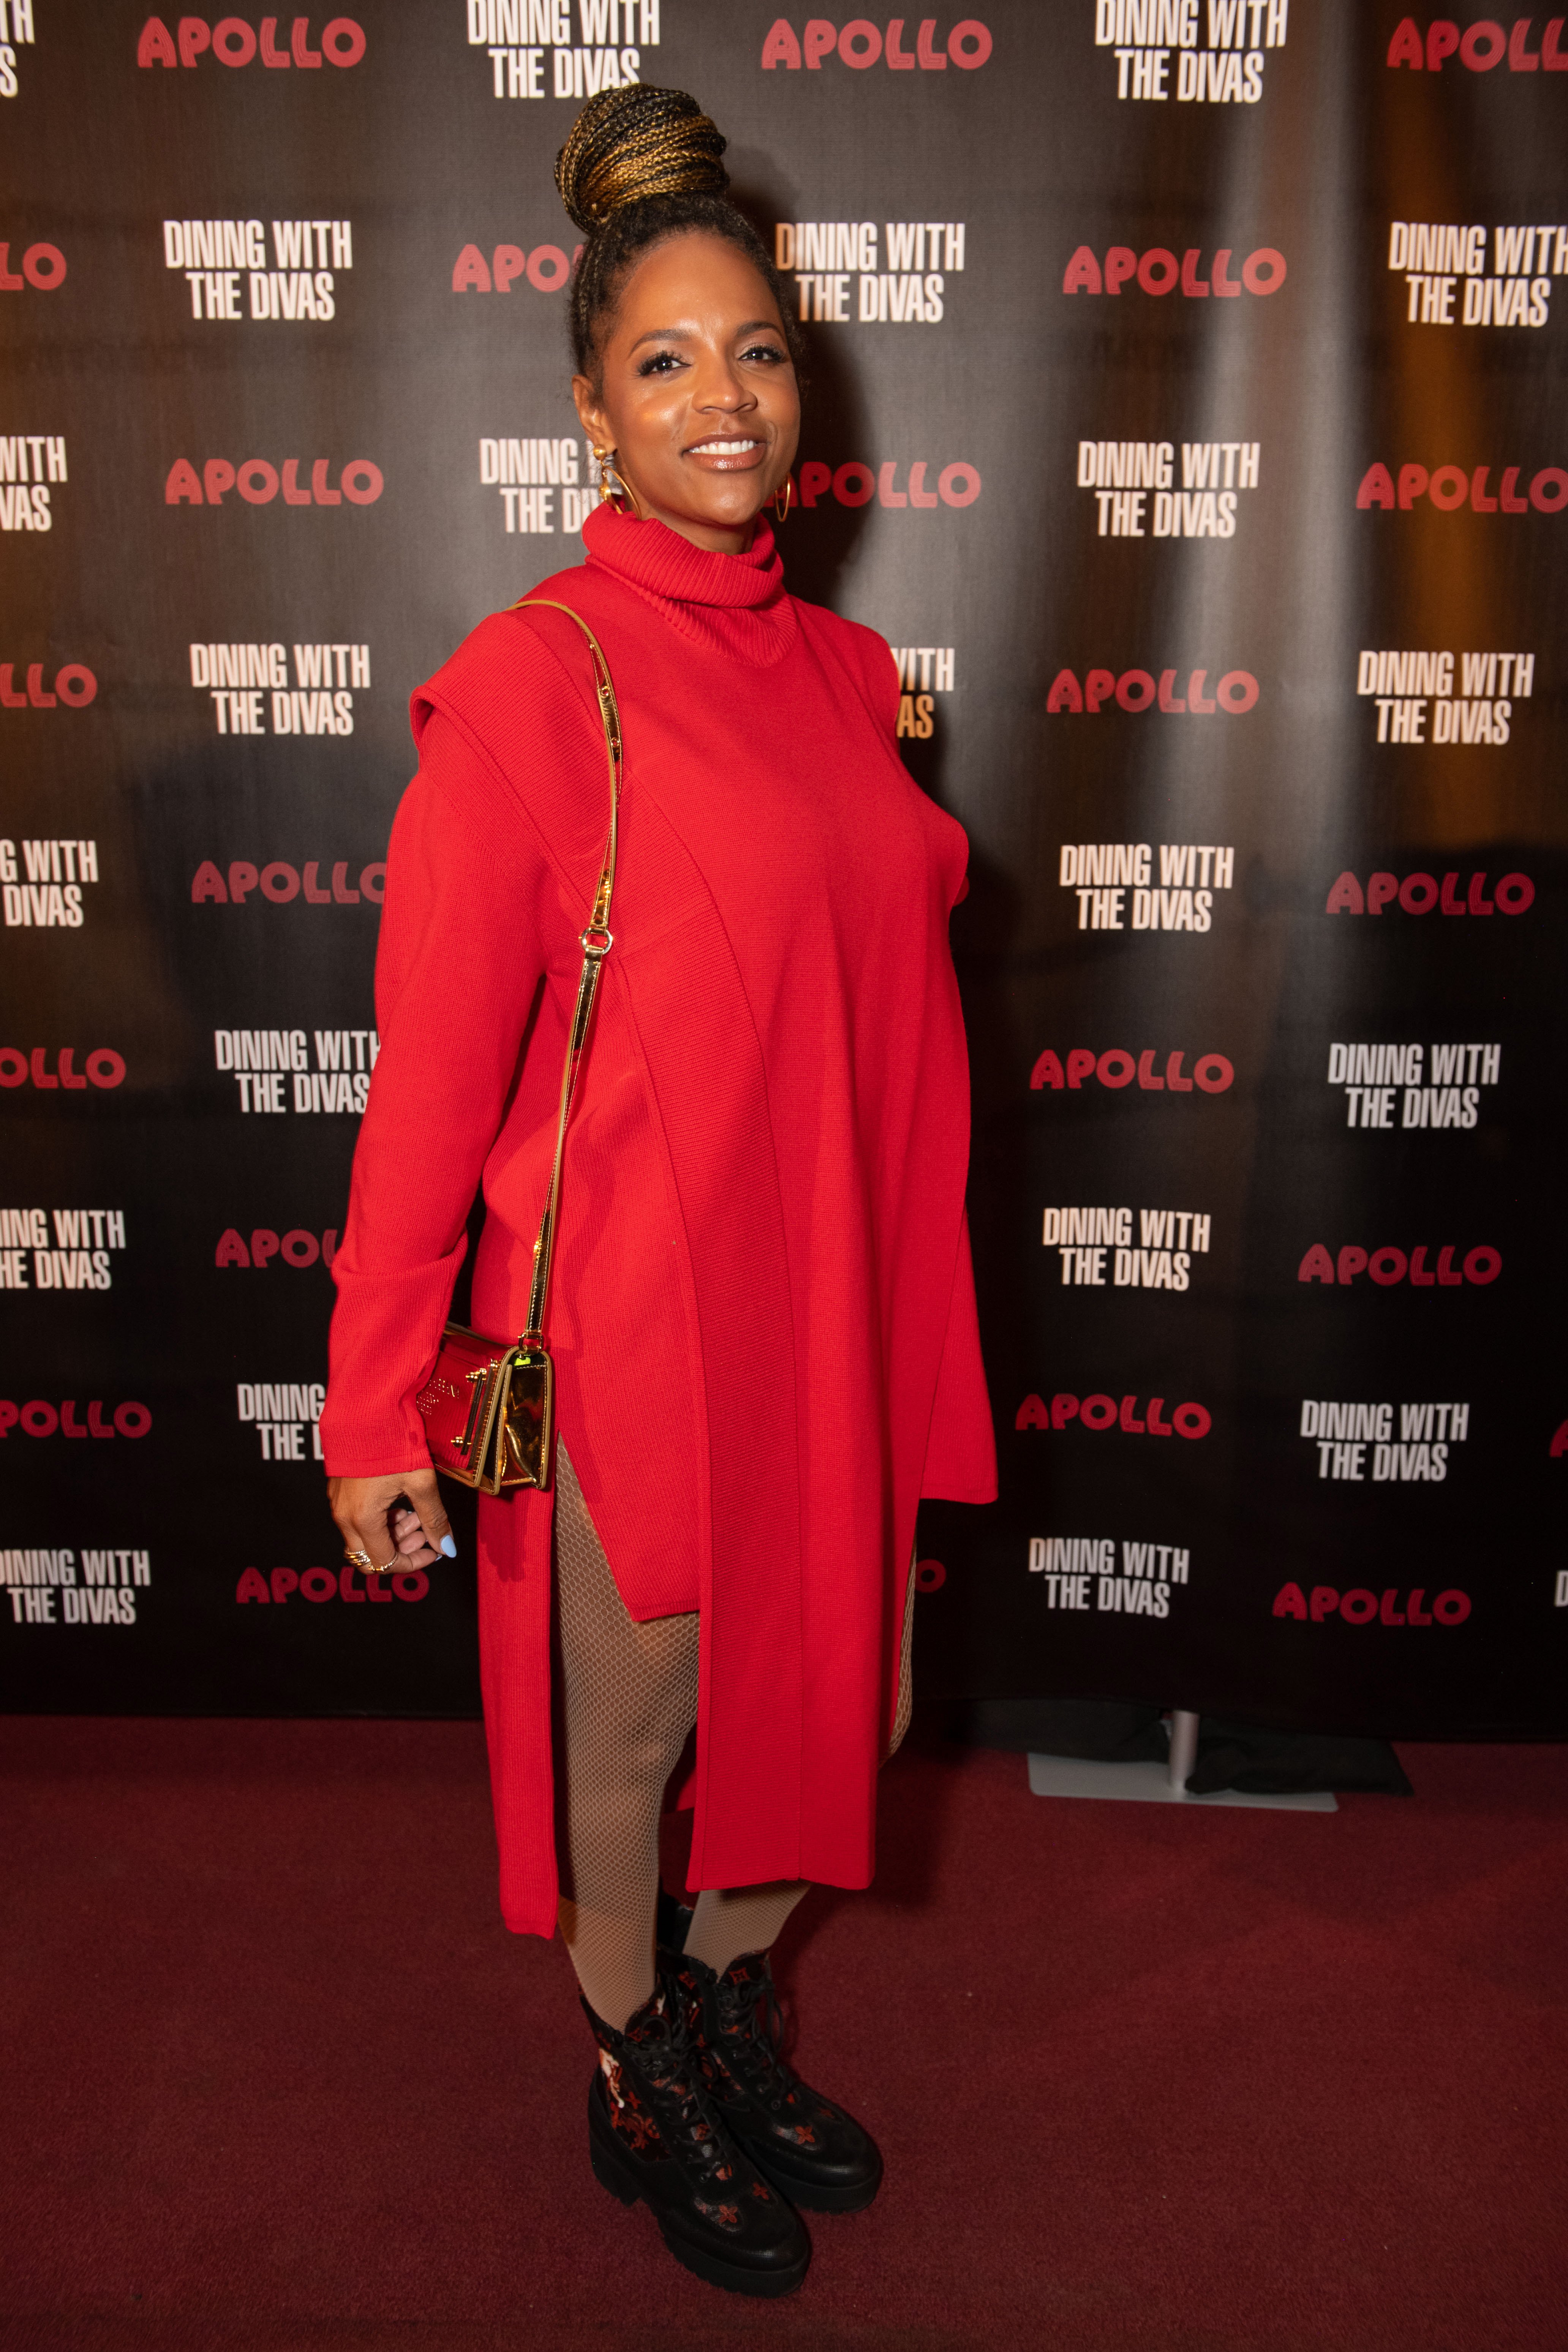 Atoya Burleson during the Dining With The Divas Luncheon at The Apollo Theater on April 7, 2022, in New York City. | Source: Getty Images